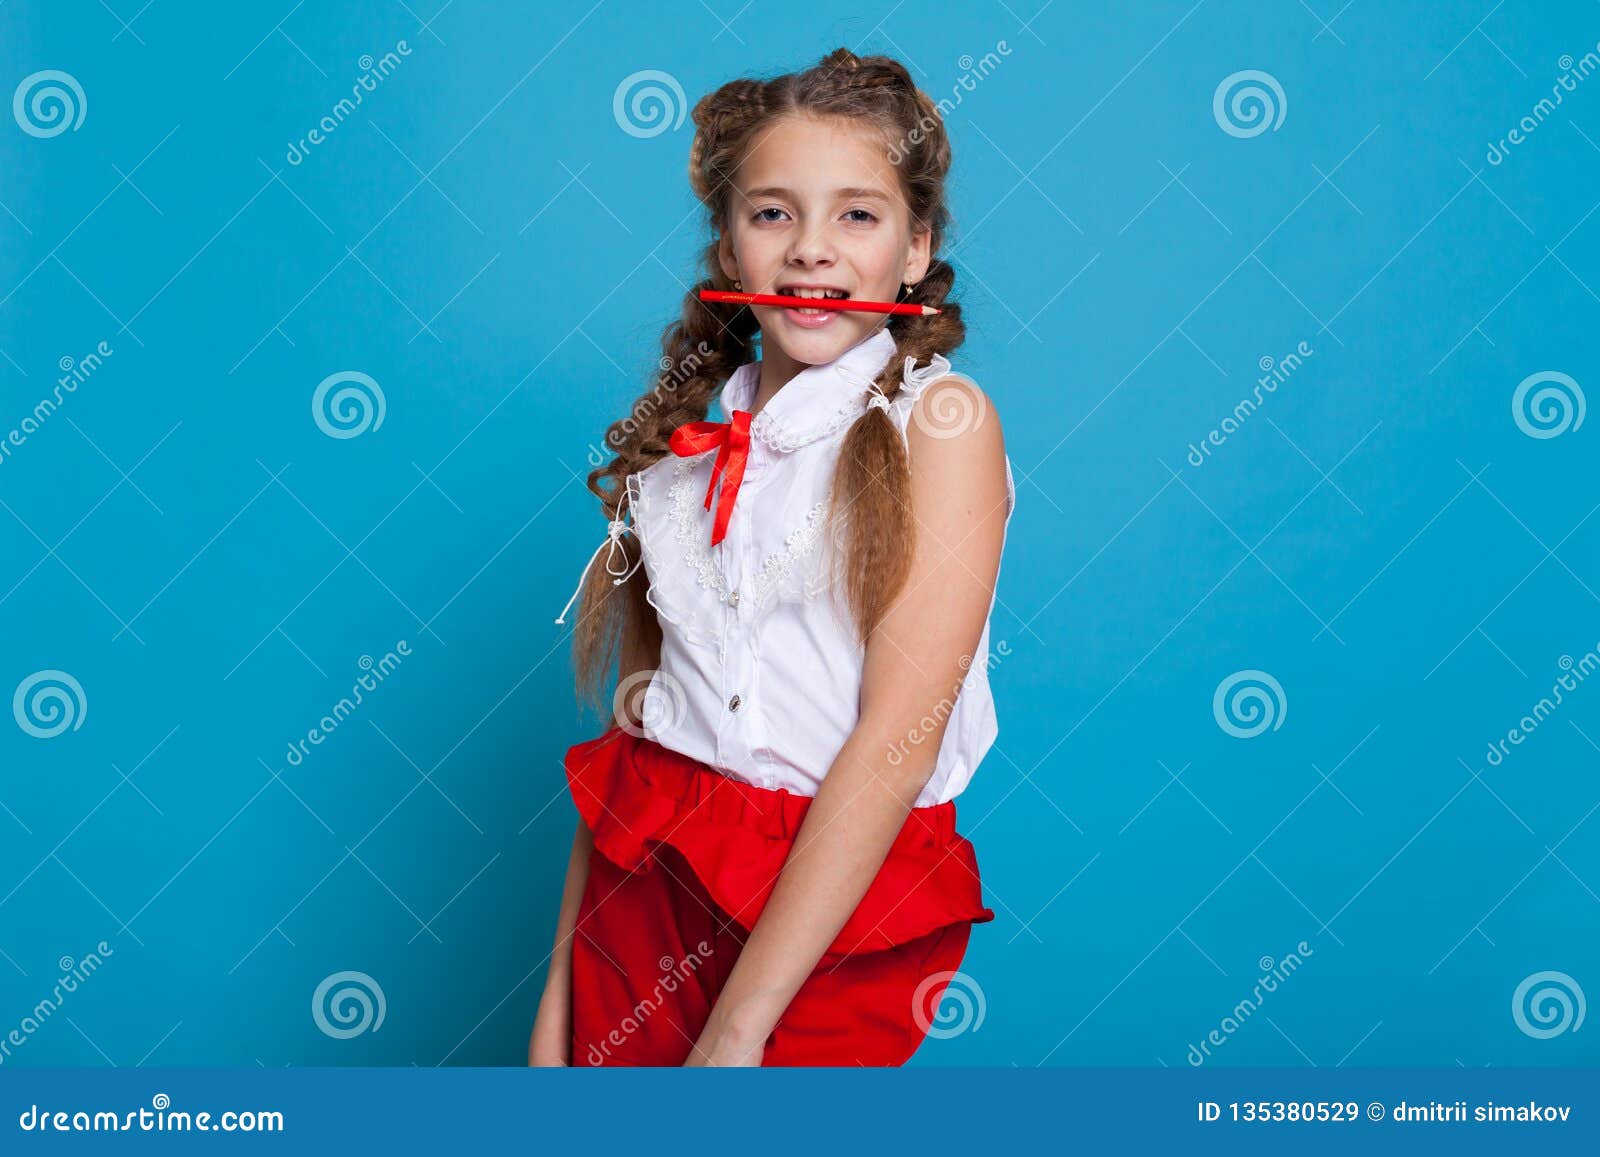 Beautiful Girl With Braids With A Red Pencil On Blue